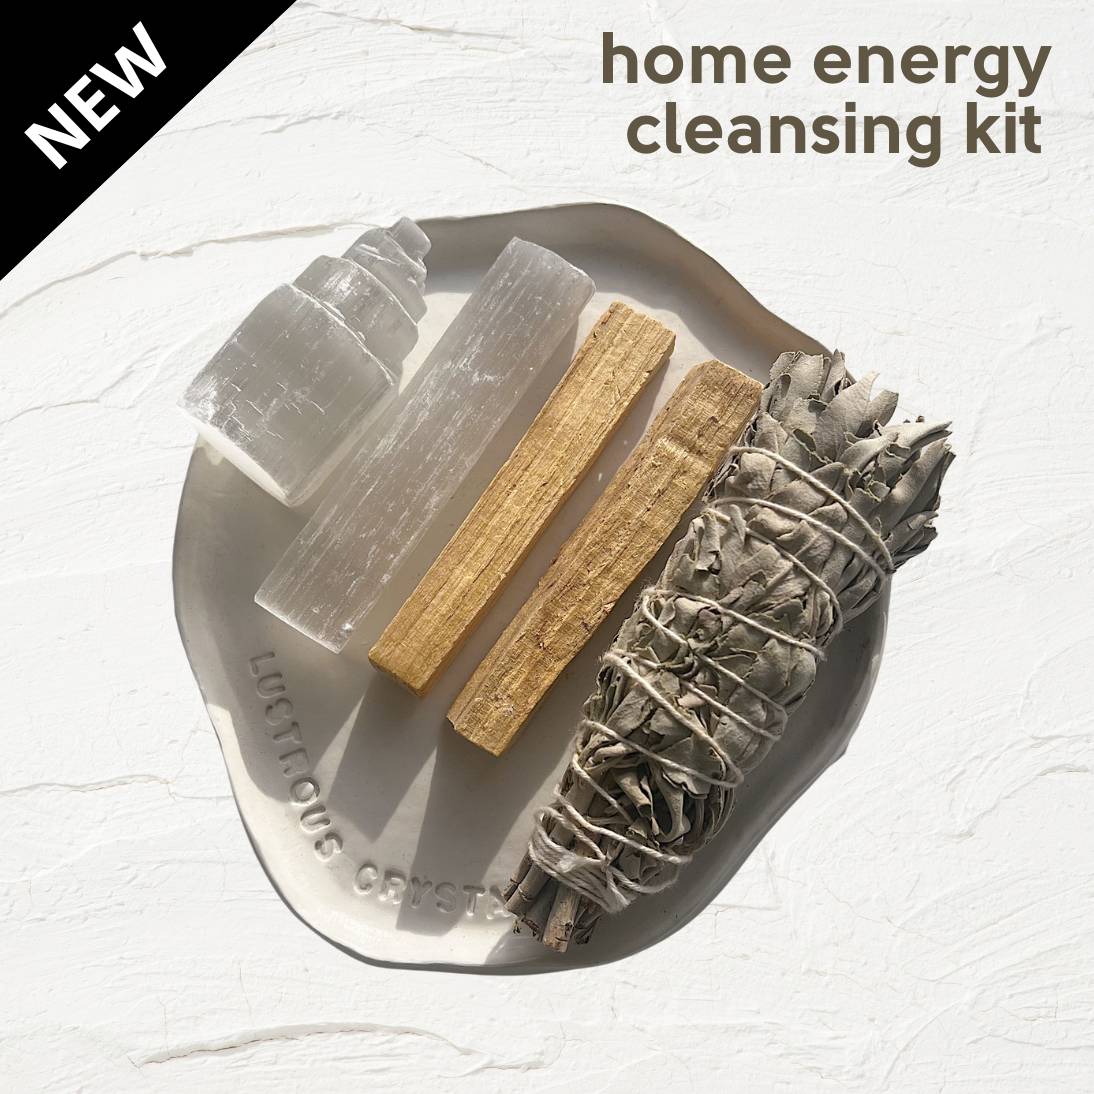 Home Energy Cleansing Kit